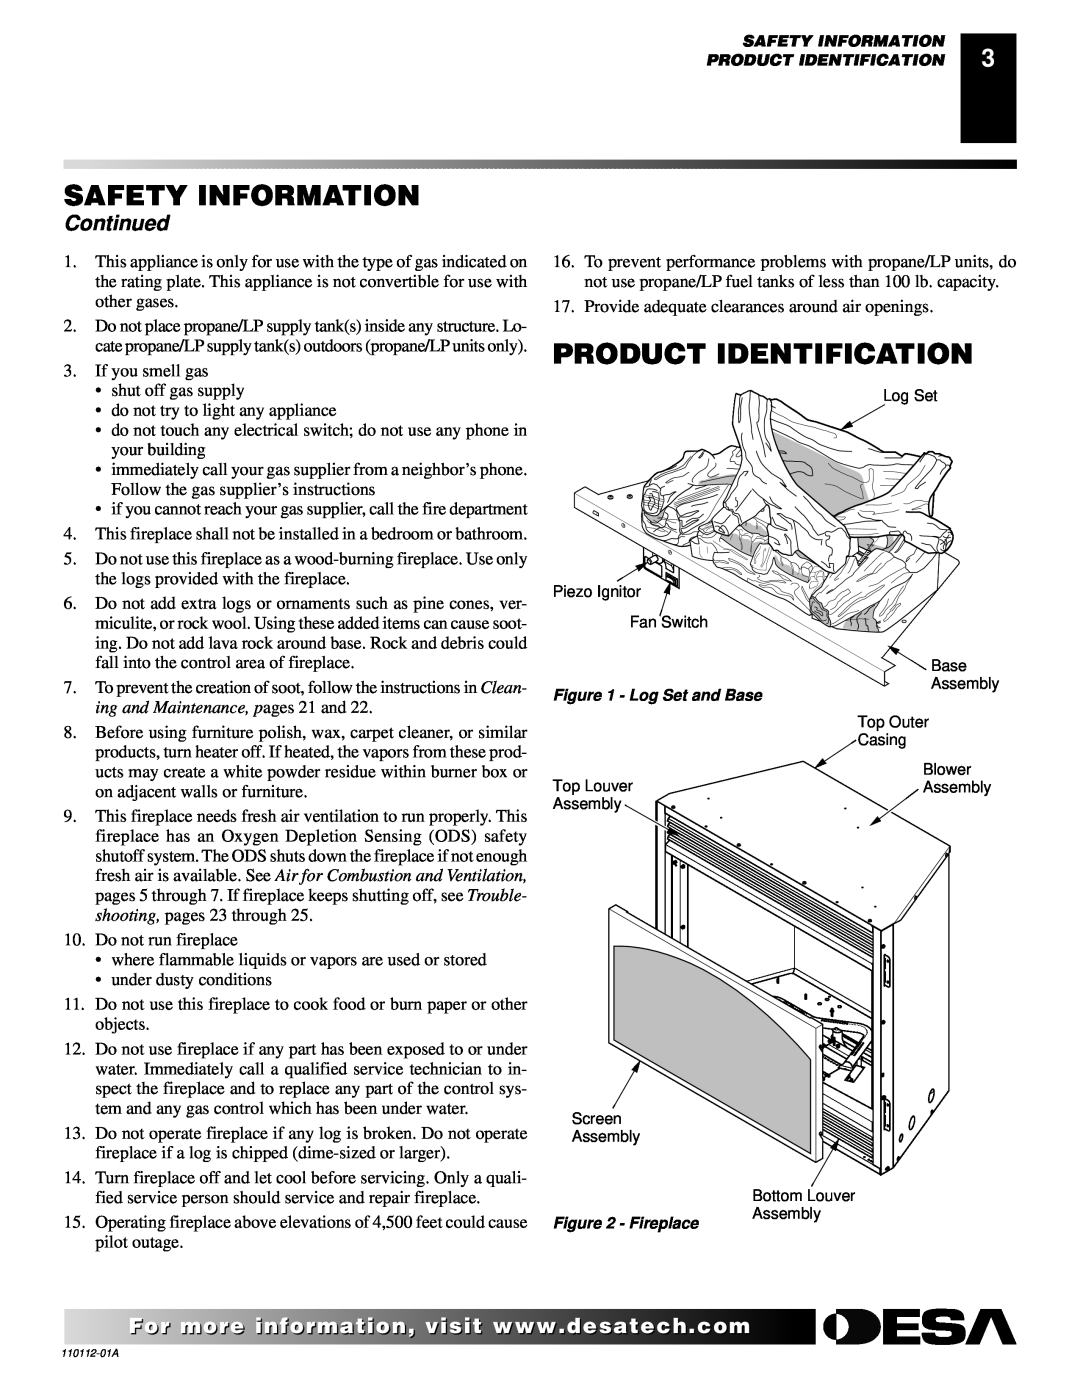 Desa VTGF33NRA installation manual Product Identification, Continued, Safety Information, ing and Maintenance, pages 21 and 